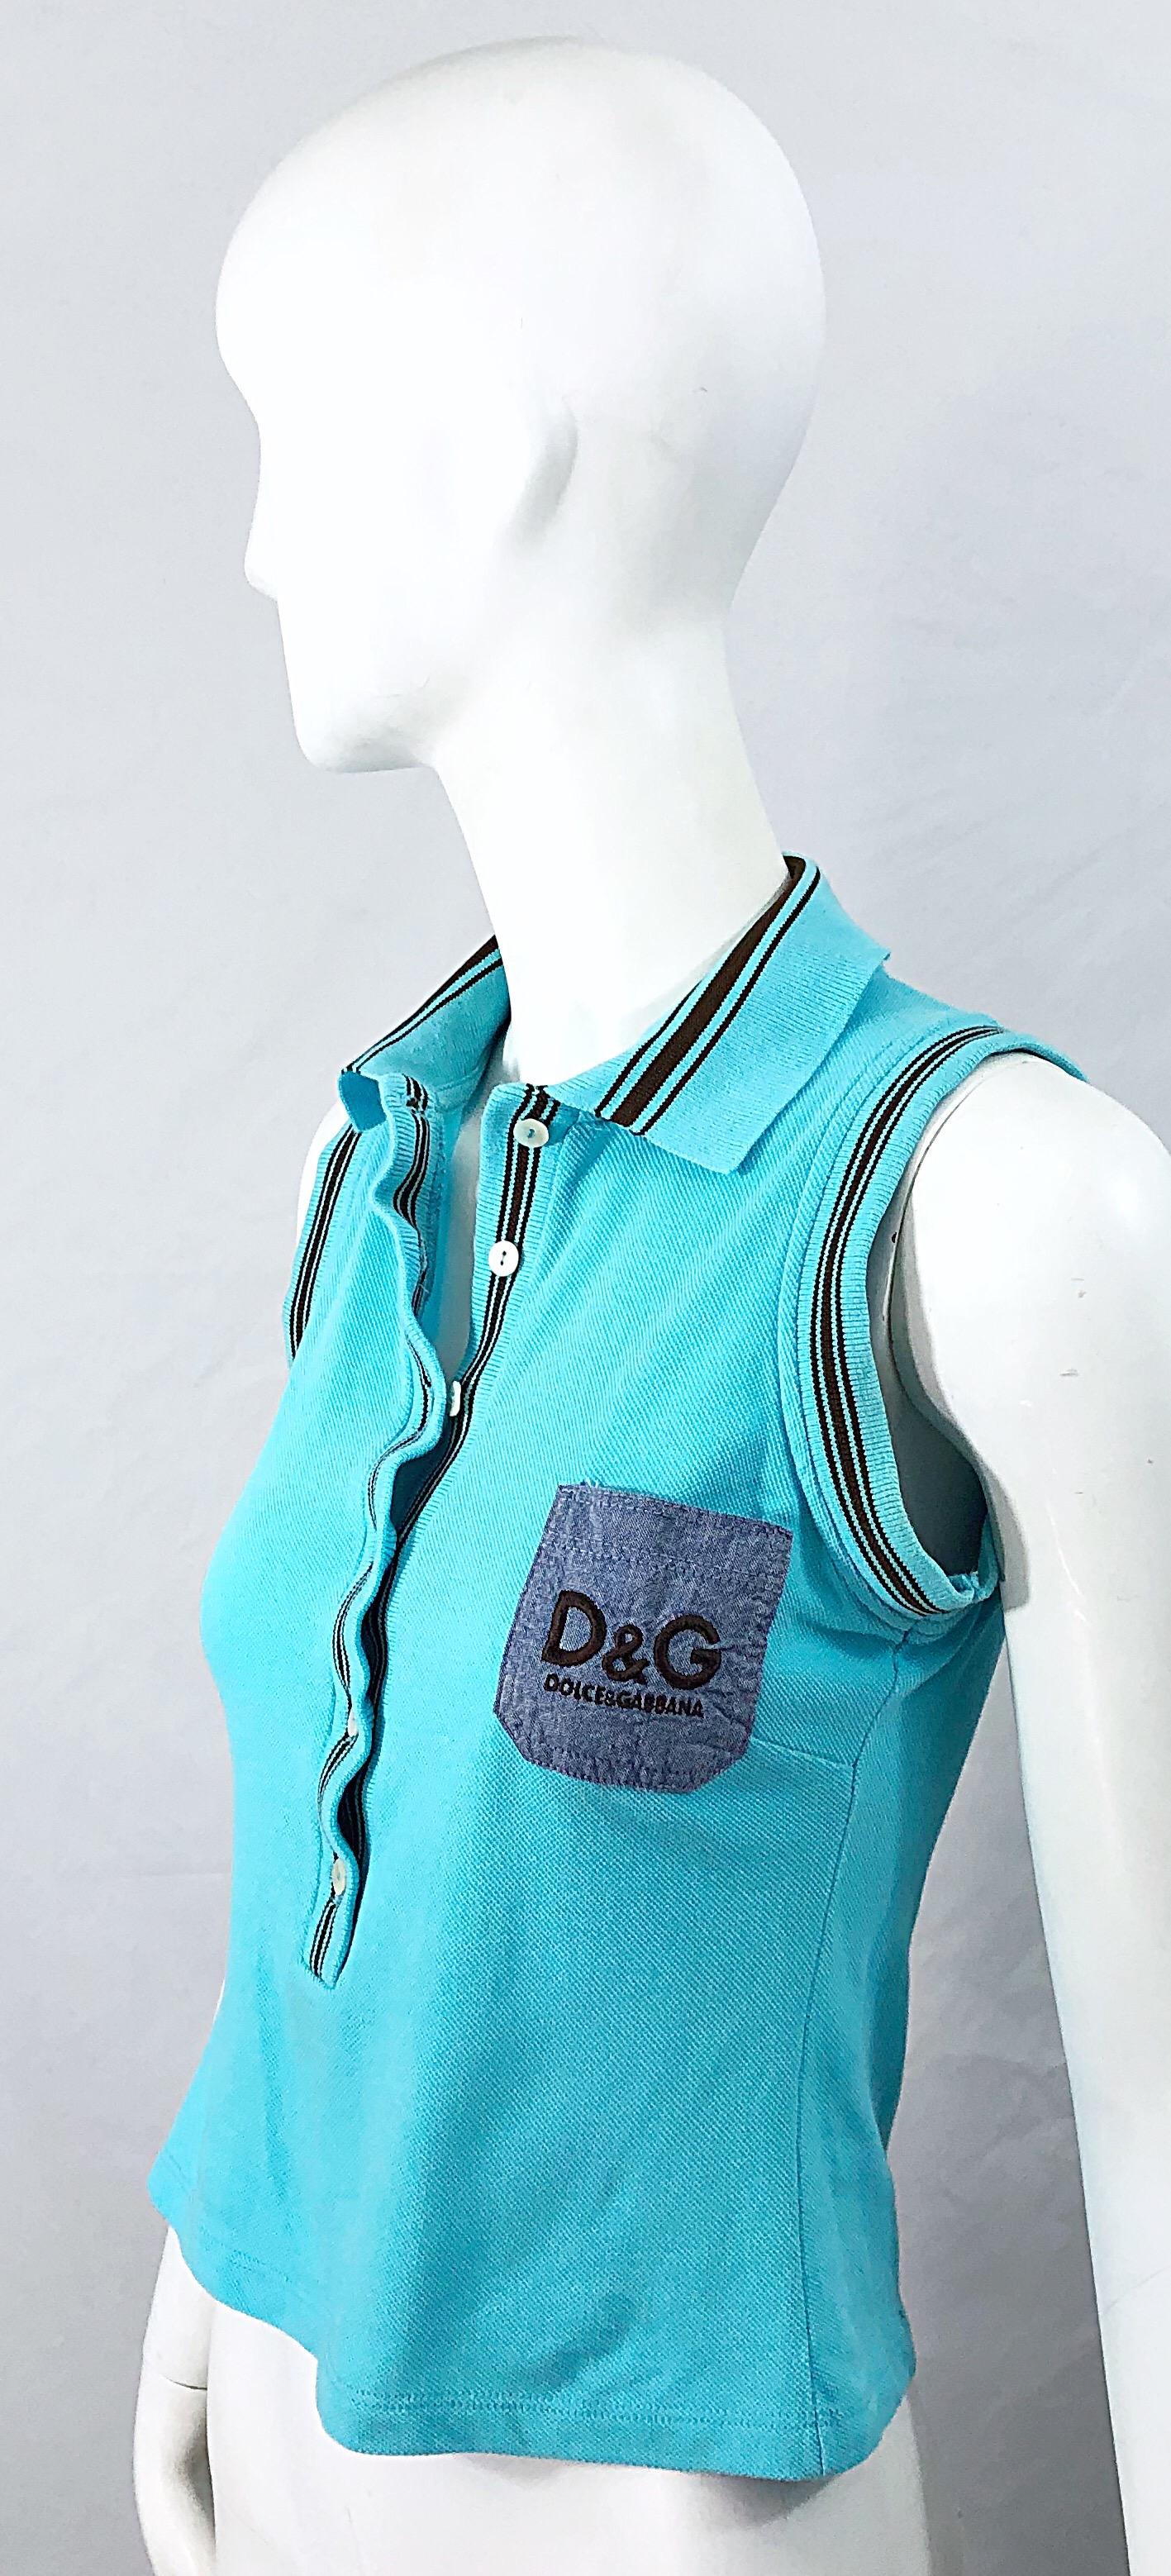 Vintage Dolce & Gabbana 1990s Turquoise Blue + Brown Logo 90s Knit Crop Top Polo For Sale 1